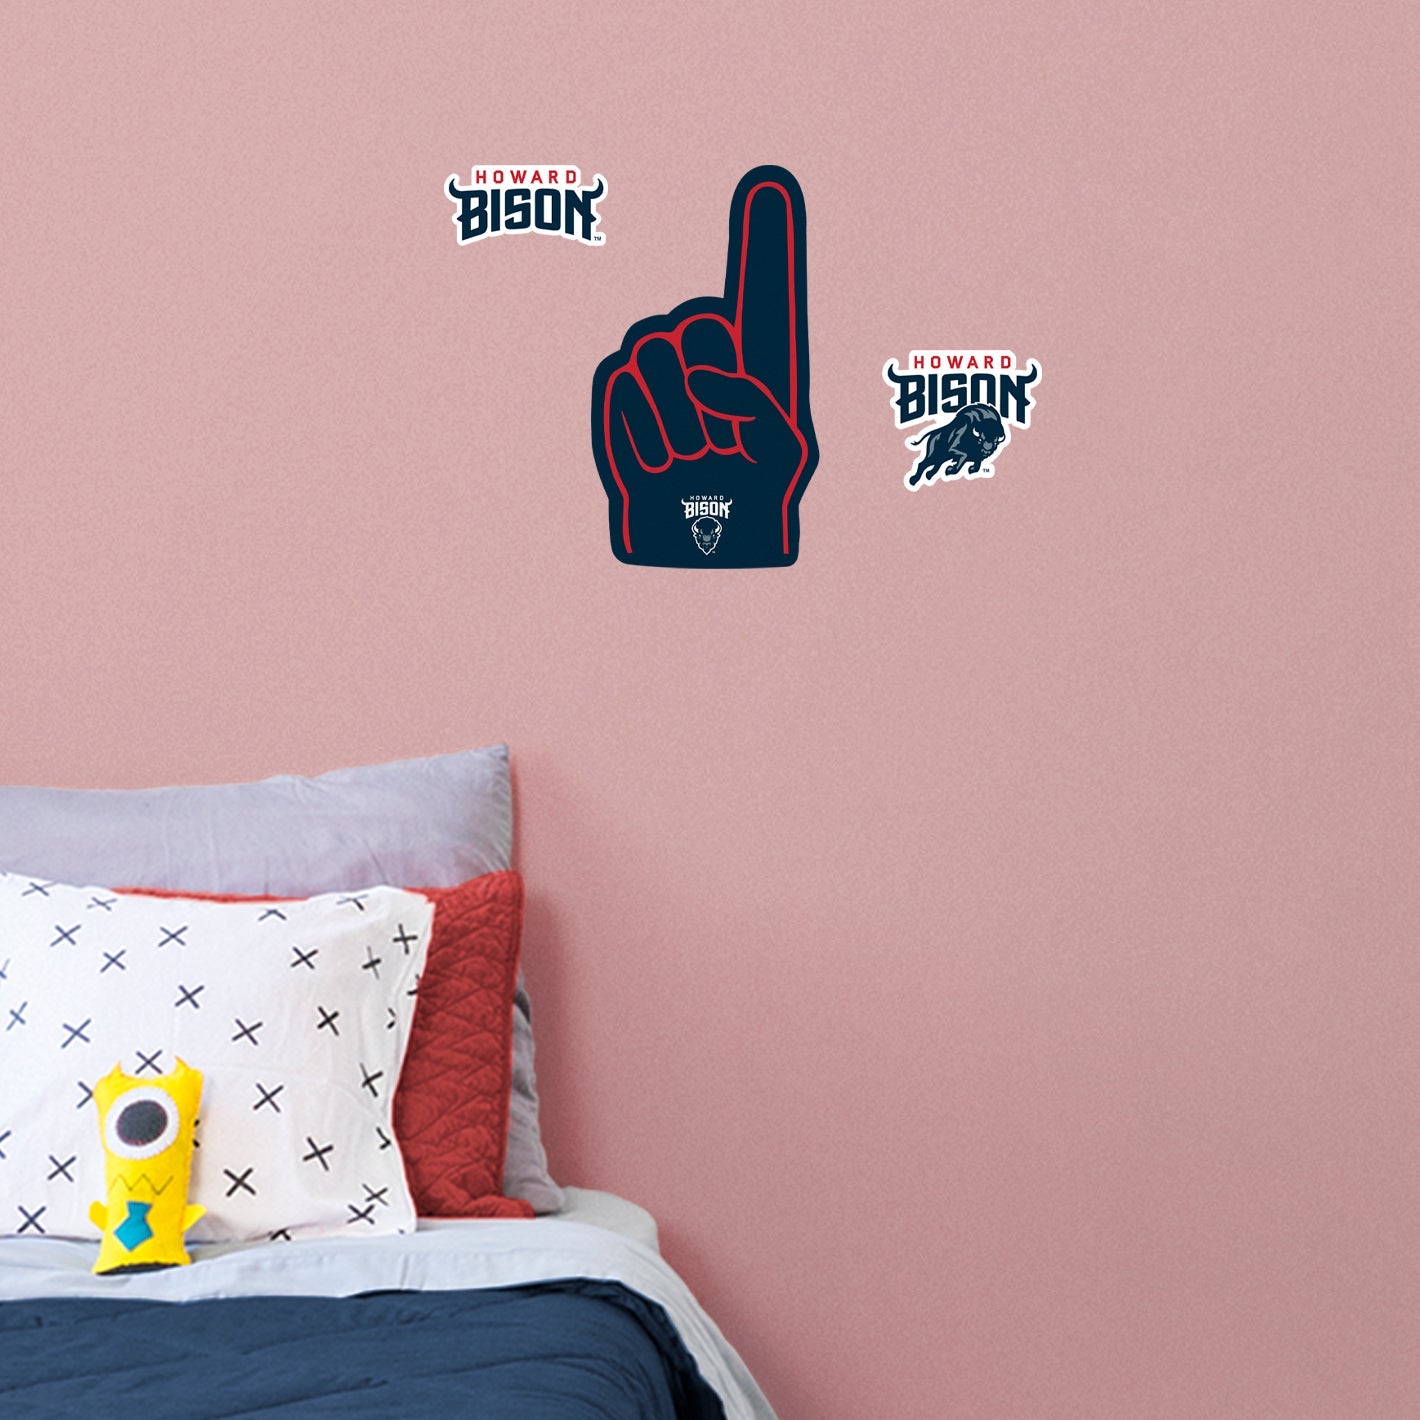 Howard Bison:    Foam Finger        - Officially Licensed NCAA Removable     Adhesive Decal